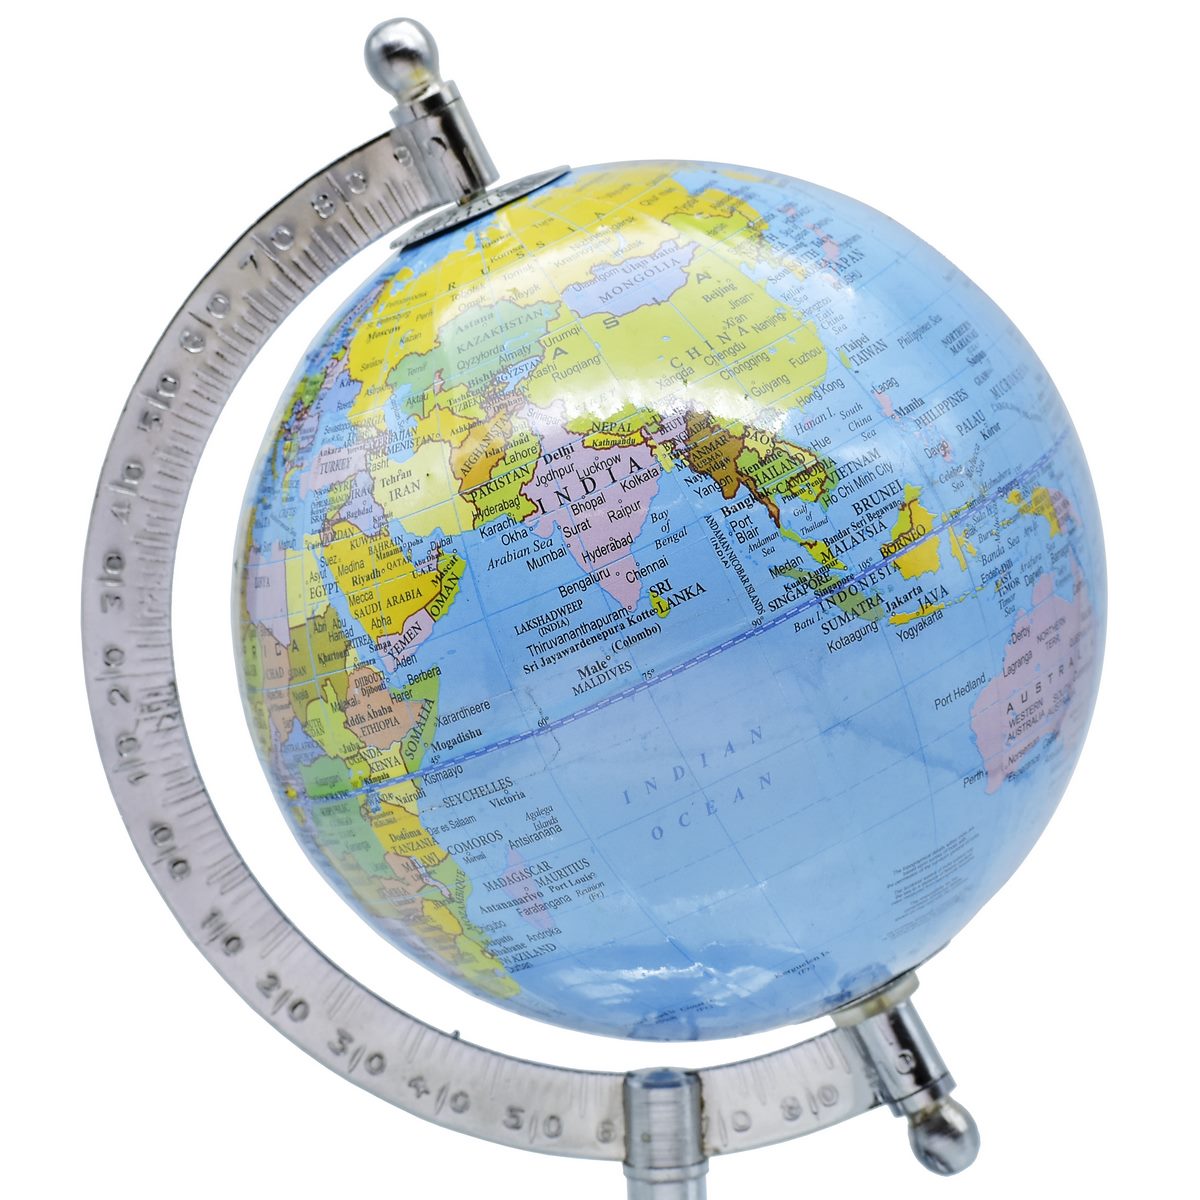 Silver Metal Base 5 Inch Blue World Globe Table Top - For Shops, Schools, Corporates, Office Use, Corporate Gifting JAWGEBL5IN